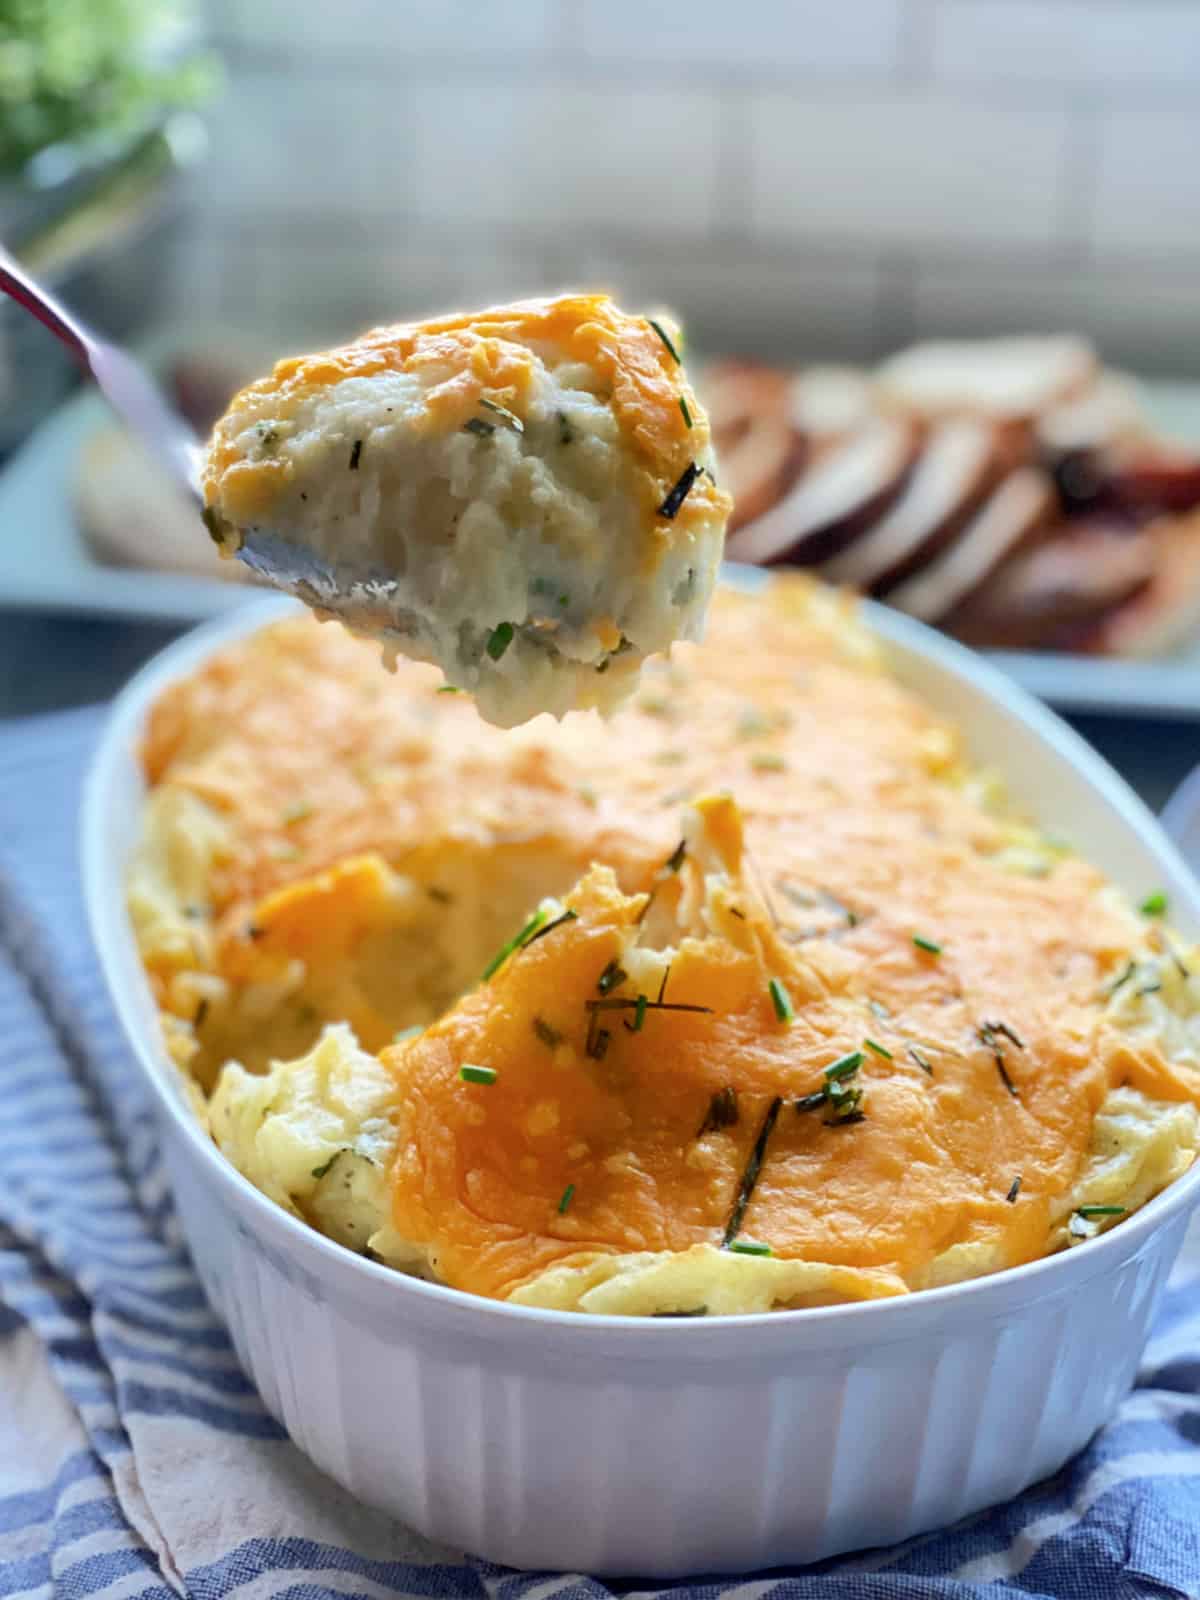 White casserole dish full of Baked Cheddar and Chive Mashed Potatoes with a spoon pulling a scoop of piping hot potatoes from the dish.